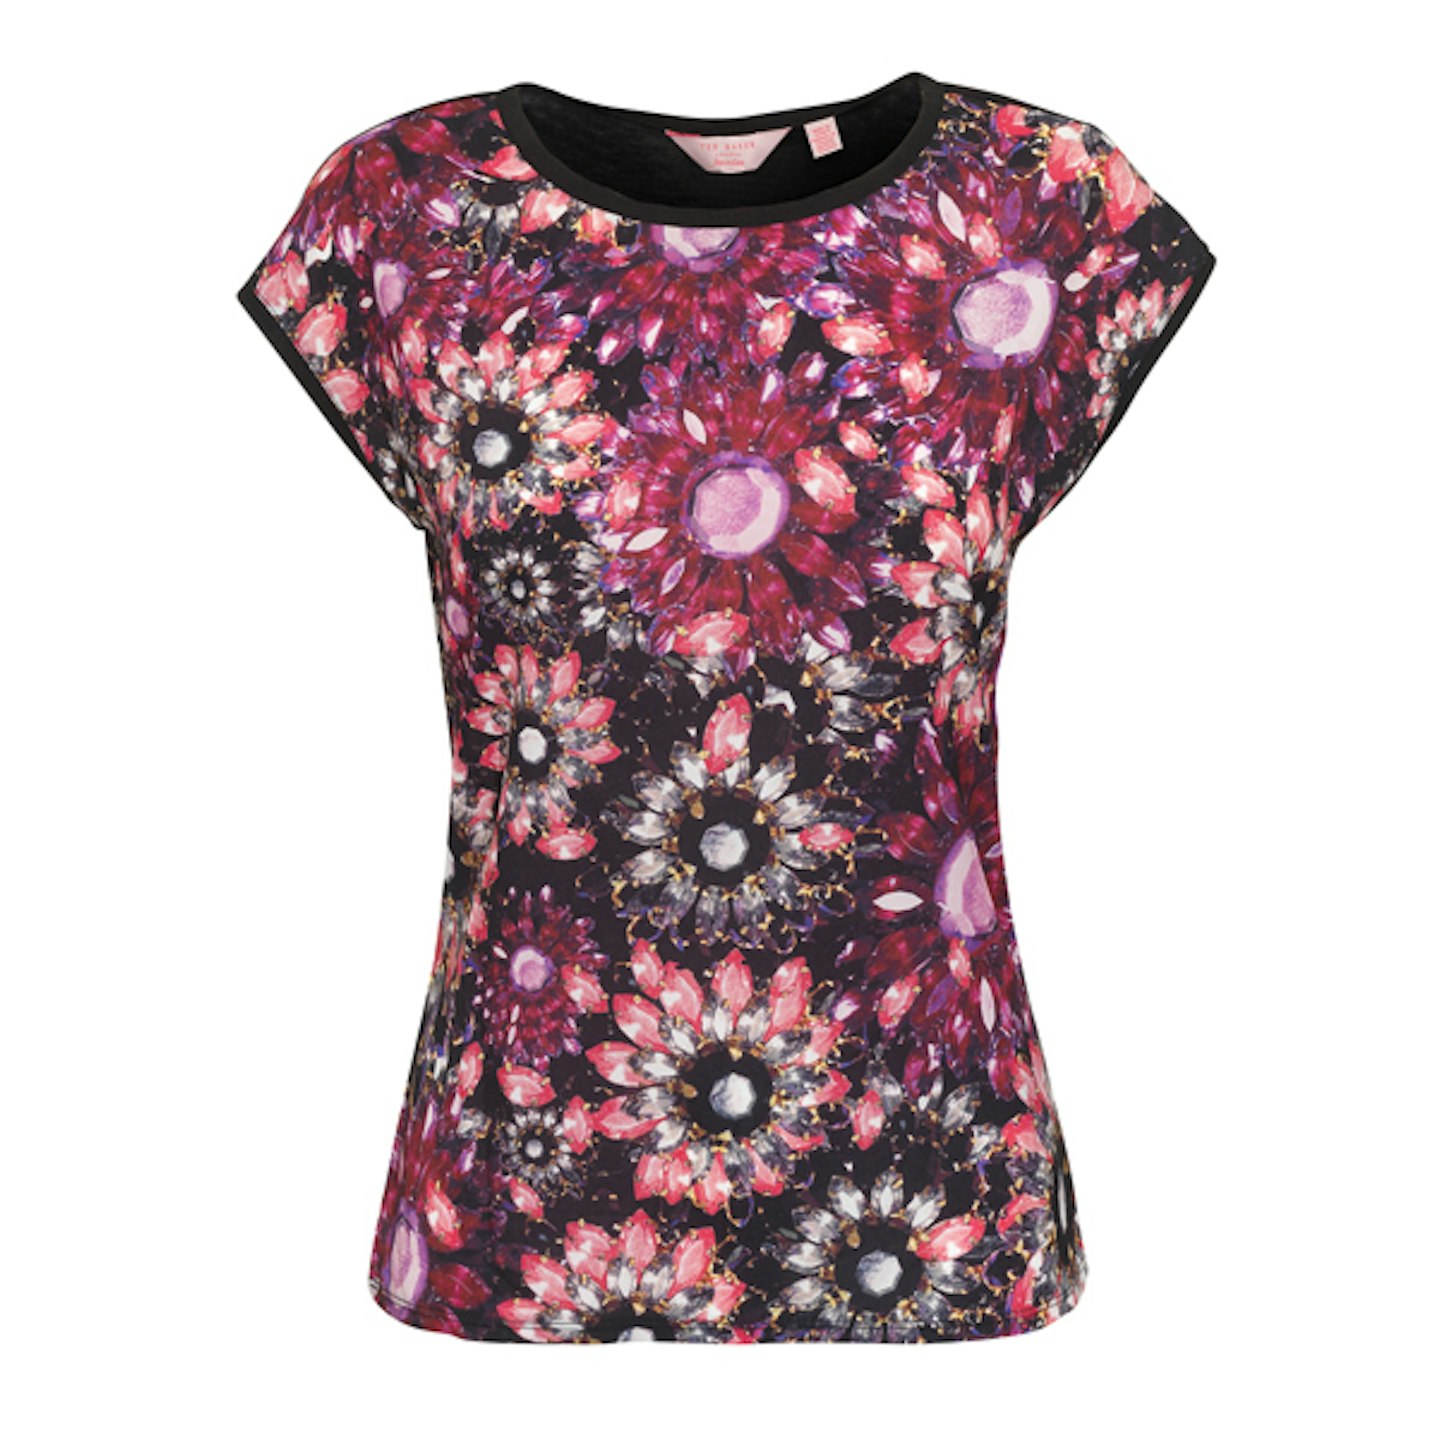 top, £35 (RRP £59), ted Baker